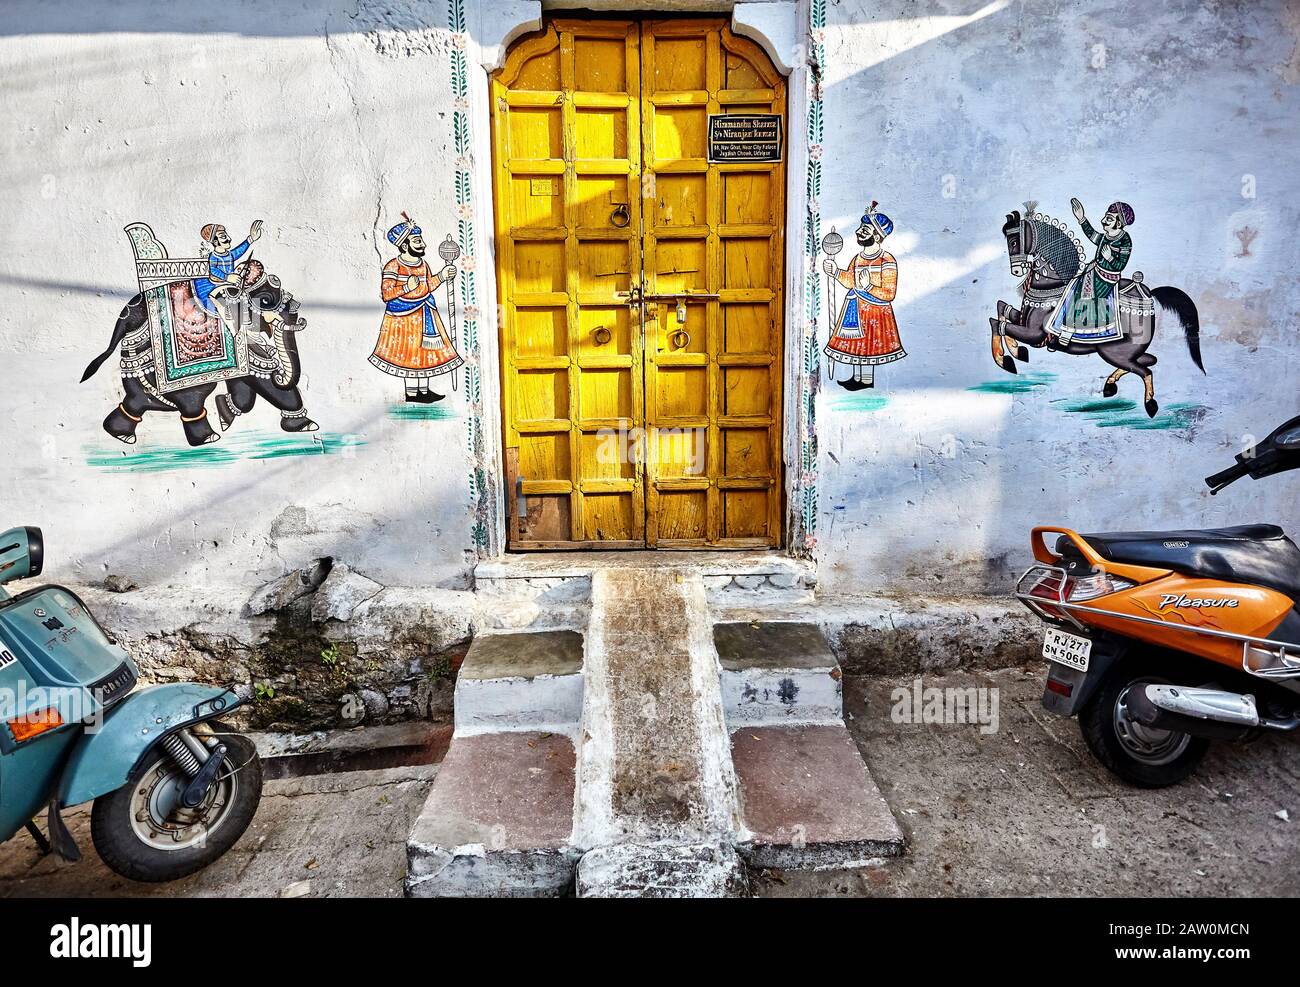 UDAIPUR, RAJASTHAN, INDIA - MARCH 03, 2015: Beautiful Paintings of Maharajas on elephant and horse at wall of house with yellow door in Udaipur city. Stock Photo